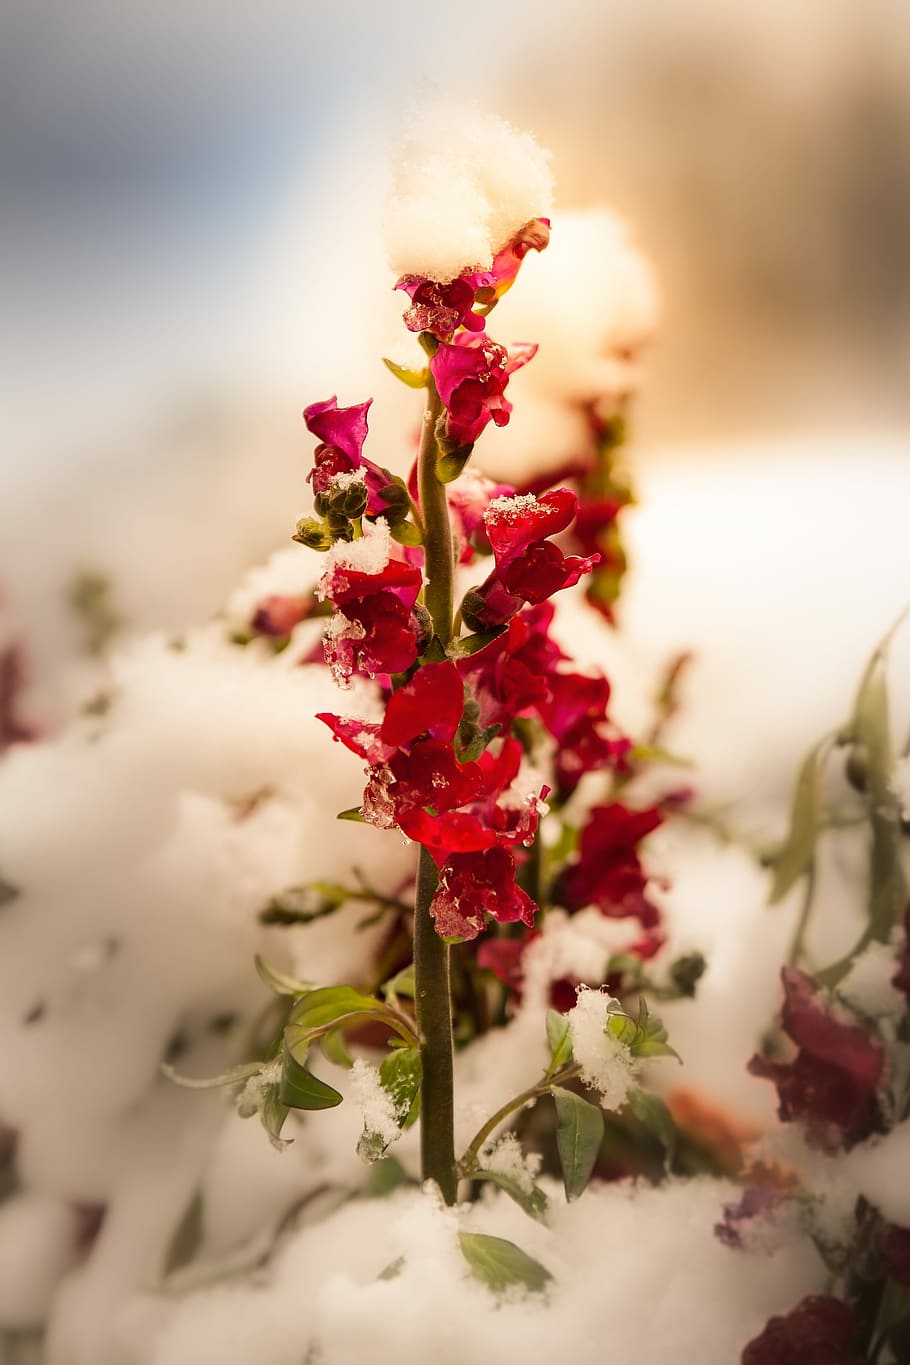 flower, red winter, snow, frost, light, survive, cold, blossom, bloom, nature